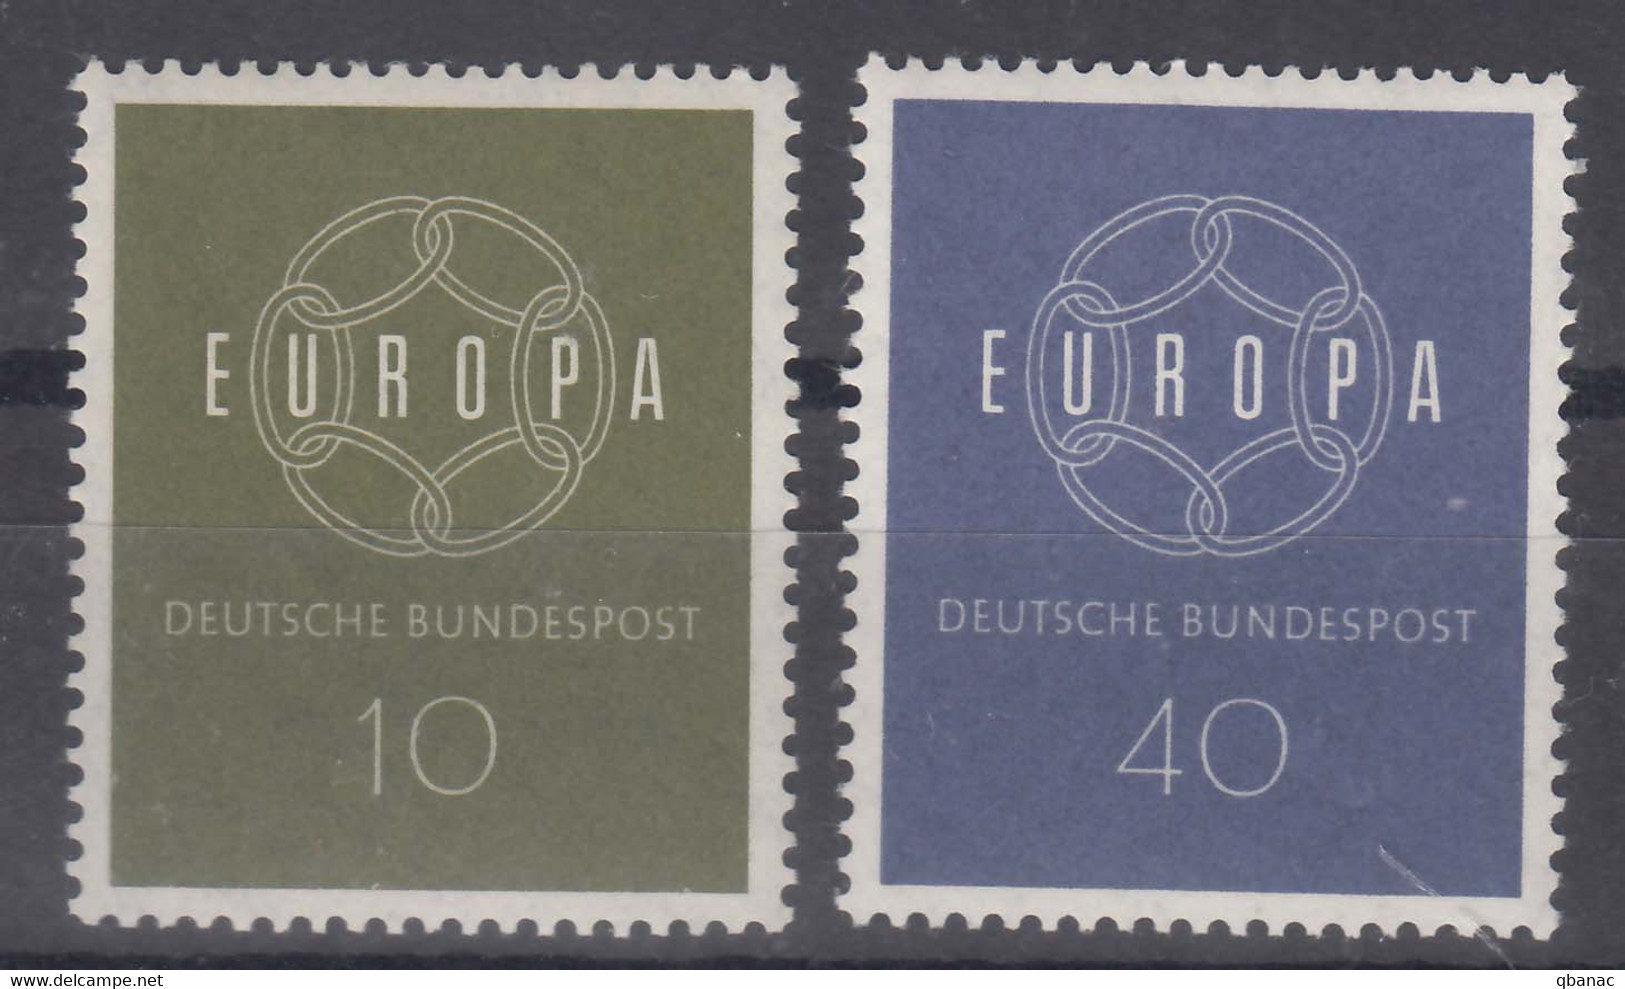 Germany 1959 Mint Never Hinged - 1959